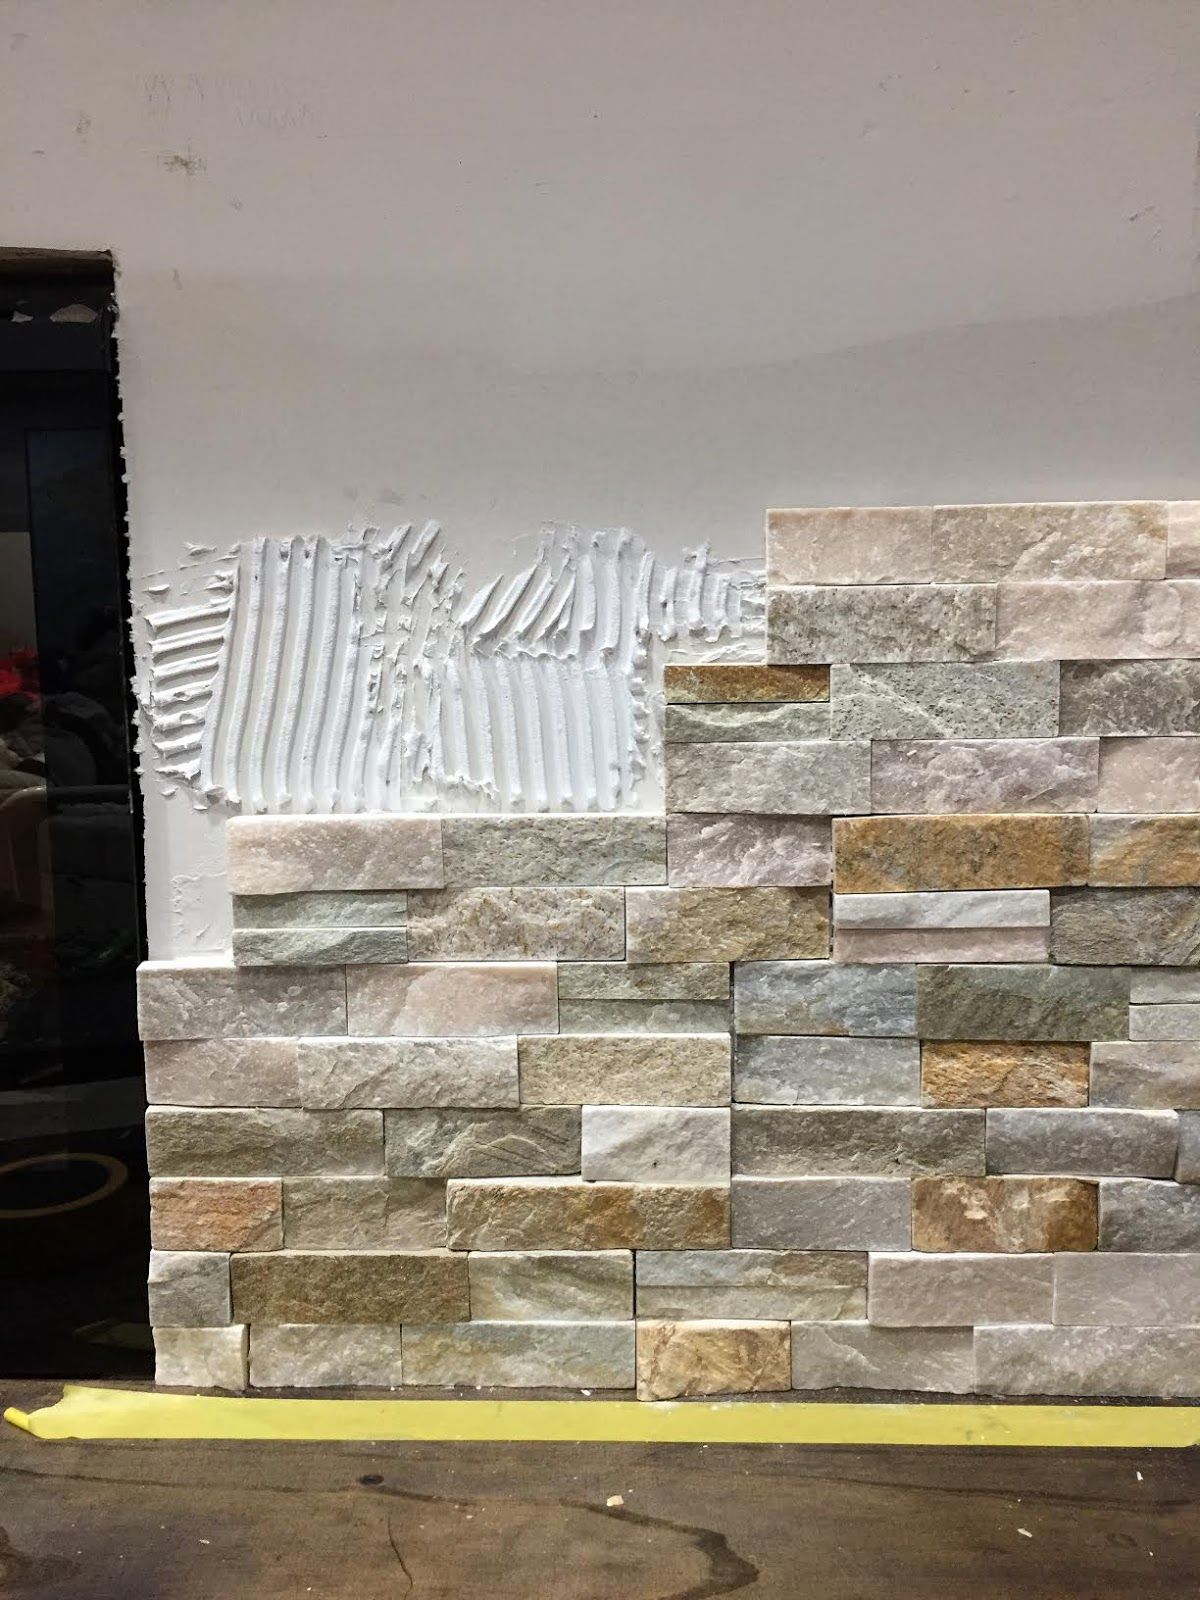 How to Install Gas Fireplace In Existing Chimney Inspirational How to Install Stacked Stone Tile On A Fireplace Wall